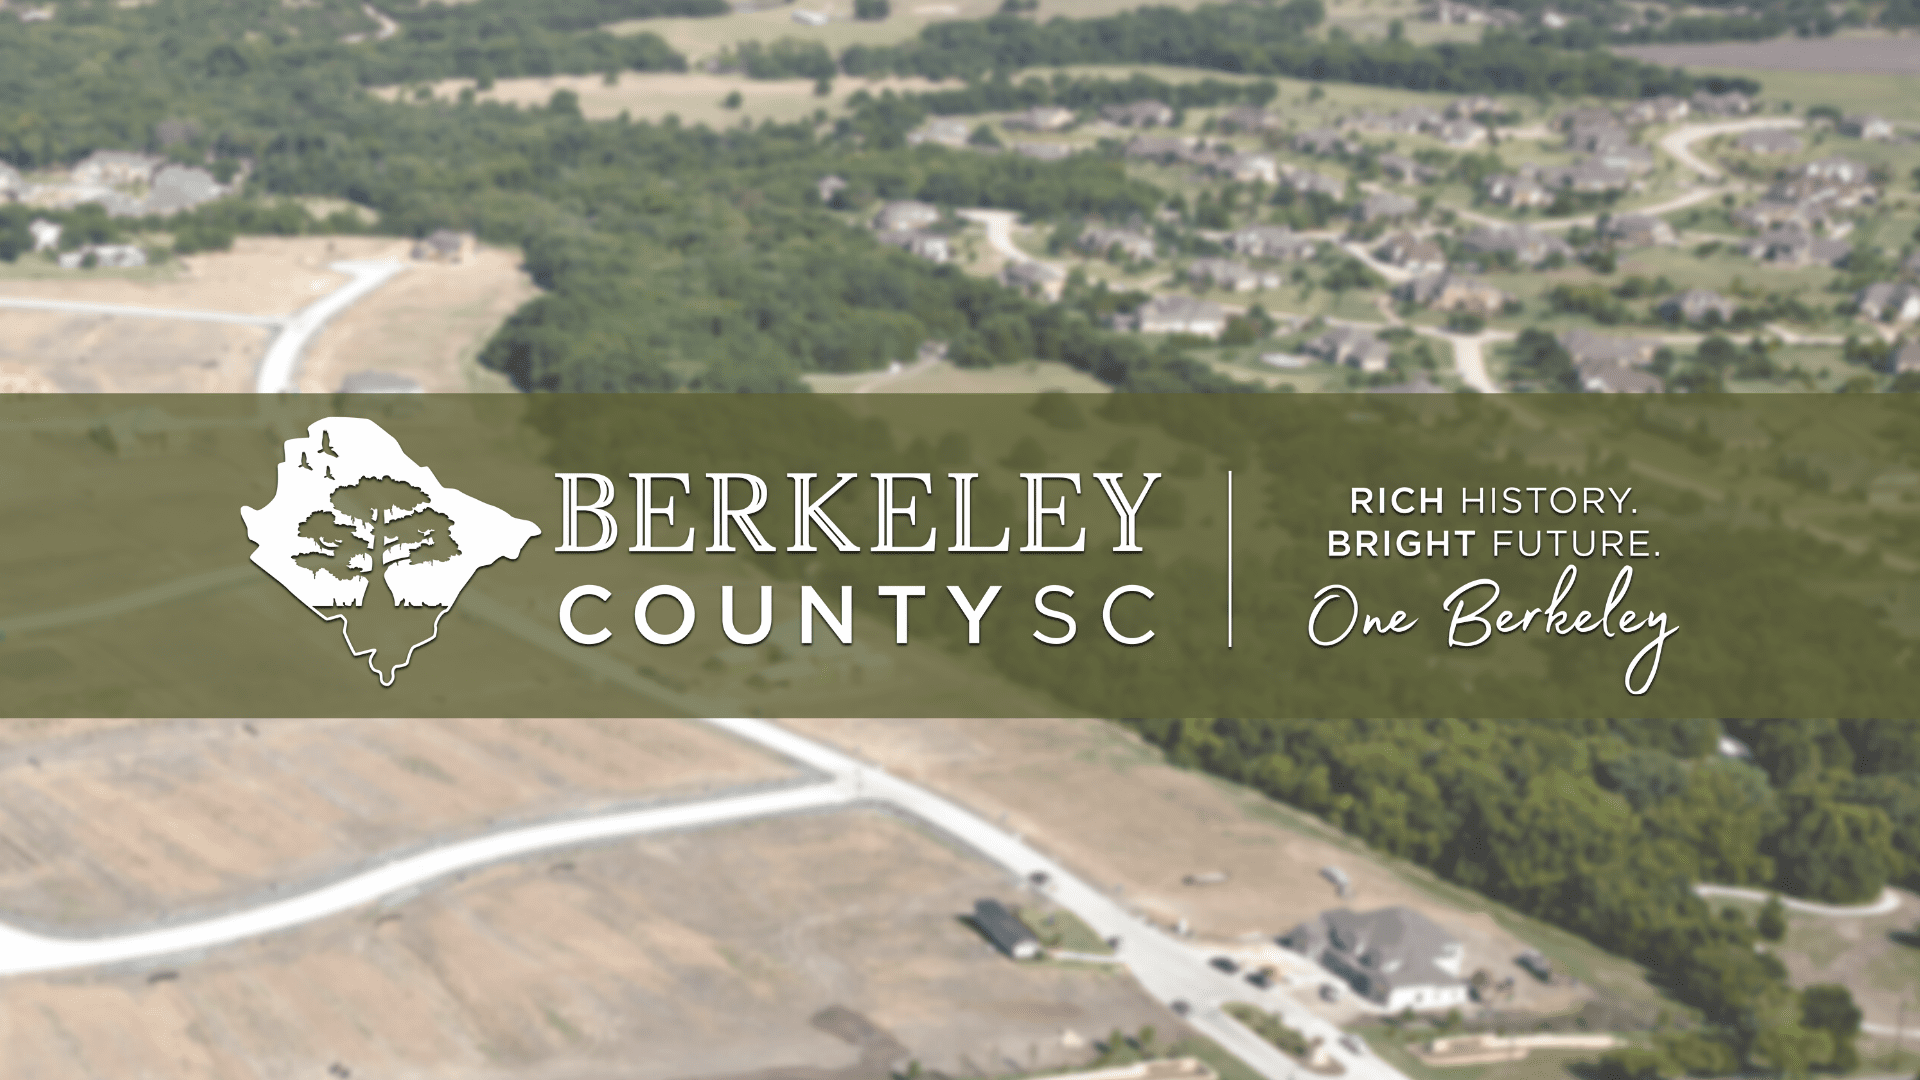 Berkeley County Using Proper Due Process to Rezone Property in Cordesville